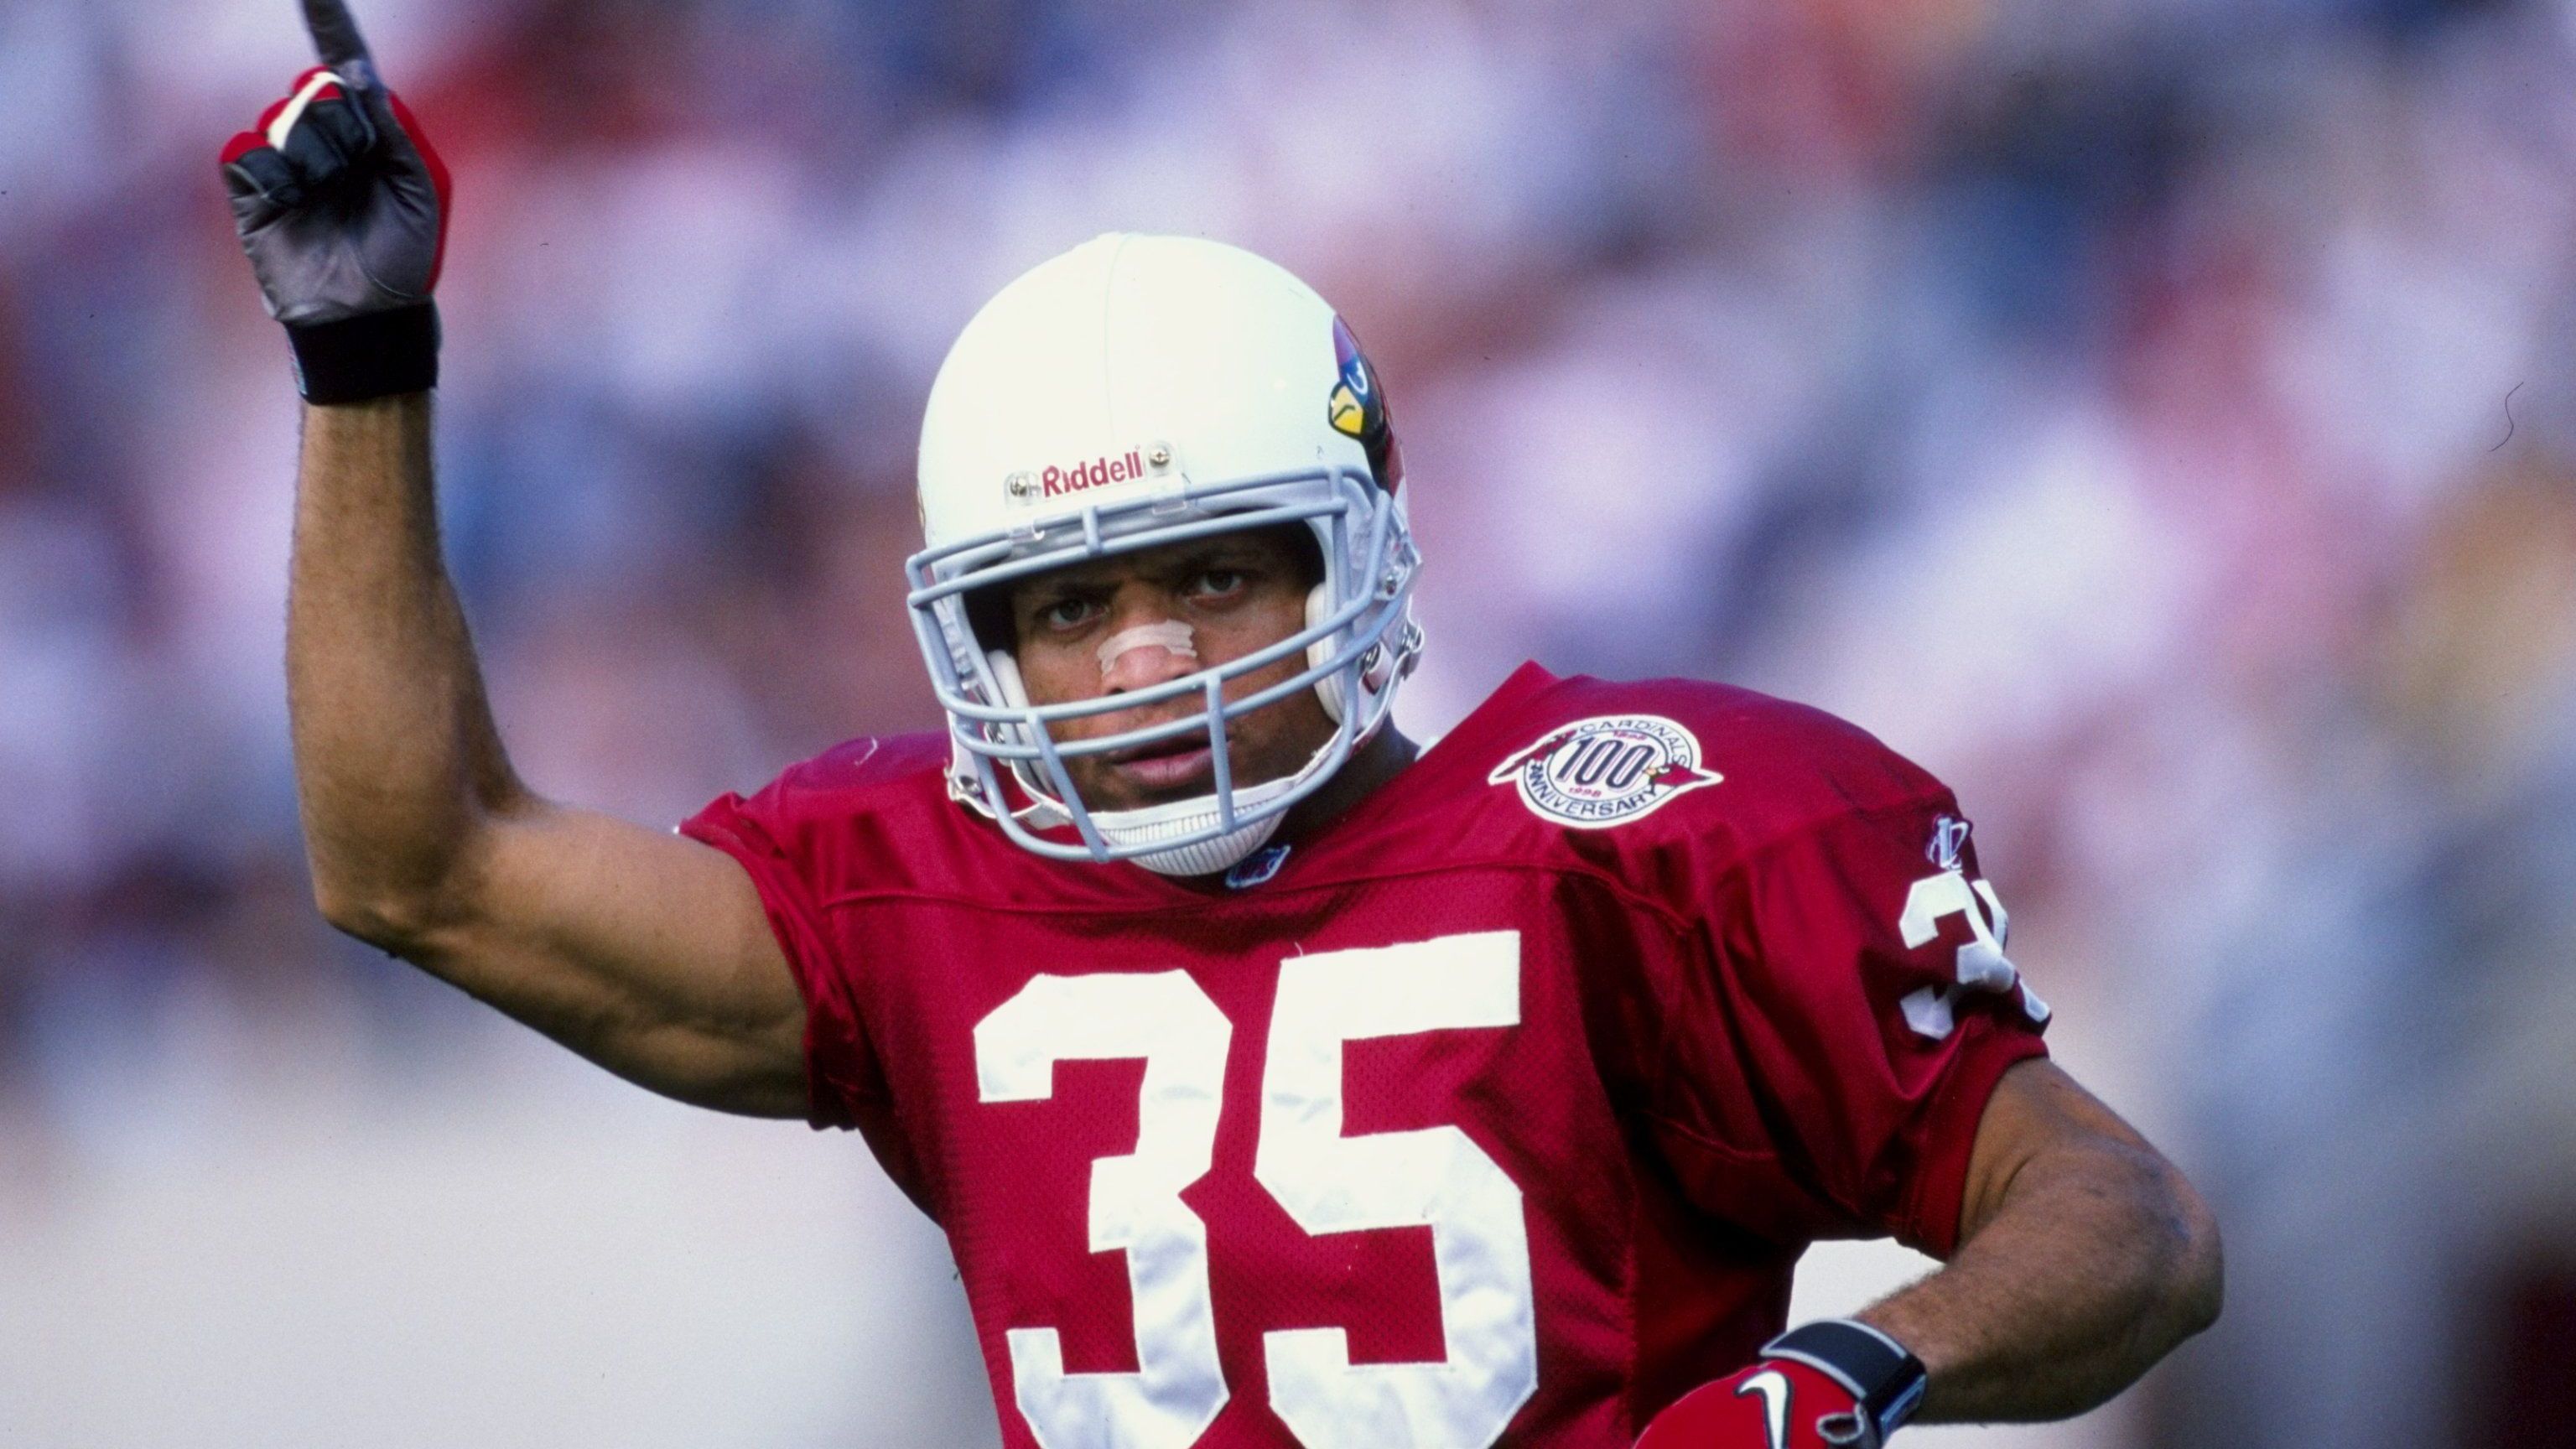 <strong>35: Aenas Williams</strong><br>Teams: Phoenix/Arizona Cardinals, St. Louis Rams<br>Position: Cornerback<br>Erfolge: Pro Football Hall of Famer, achtmaliger Pro Bowler